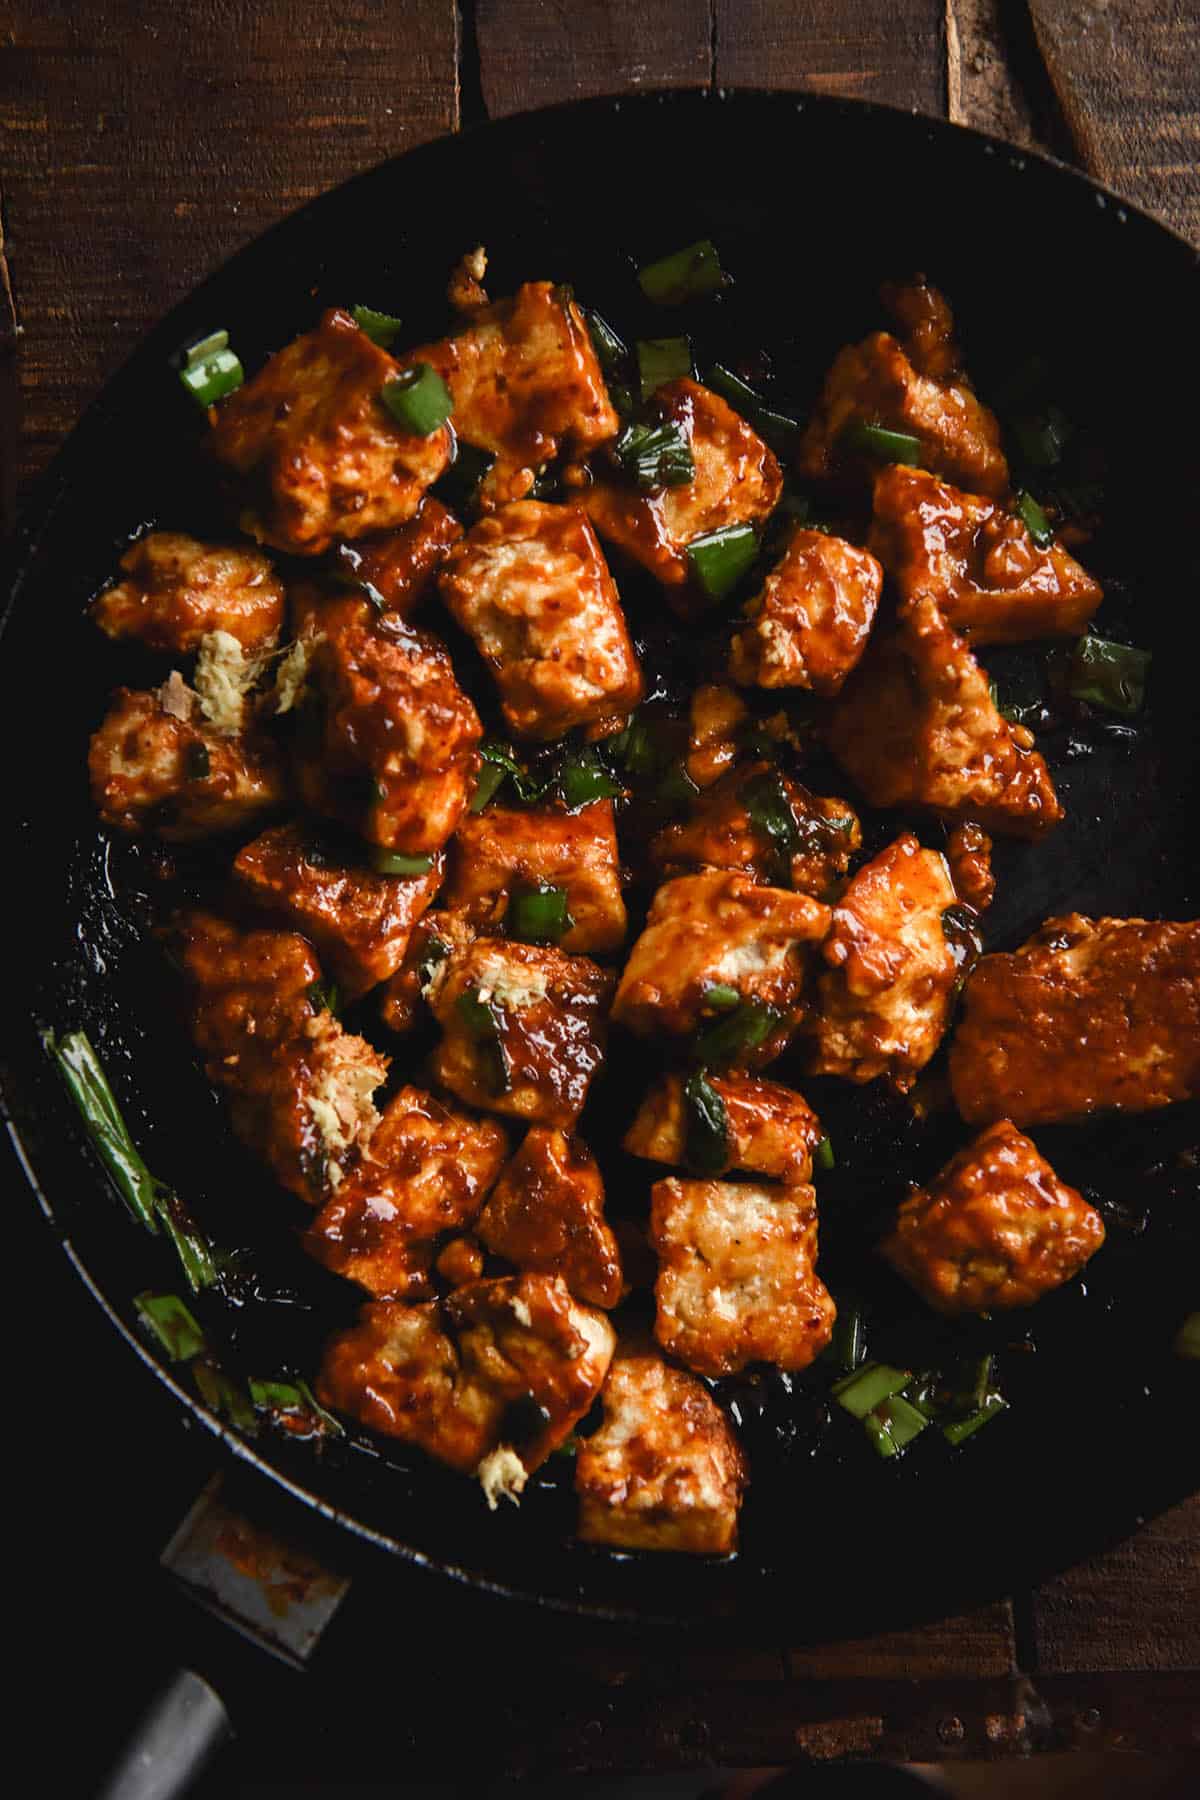 A close up aerial view of bite sized chunks of sticky ginger glazed tofu in a pan against a dark wooden backdrop. The tofu is a deep red/orange colour and is specked with spring onion greens.